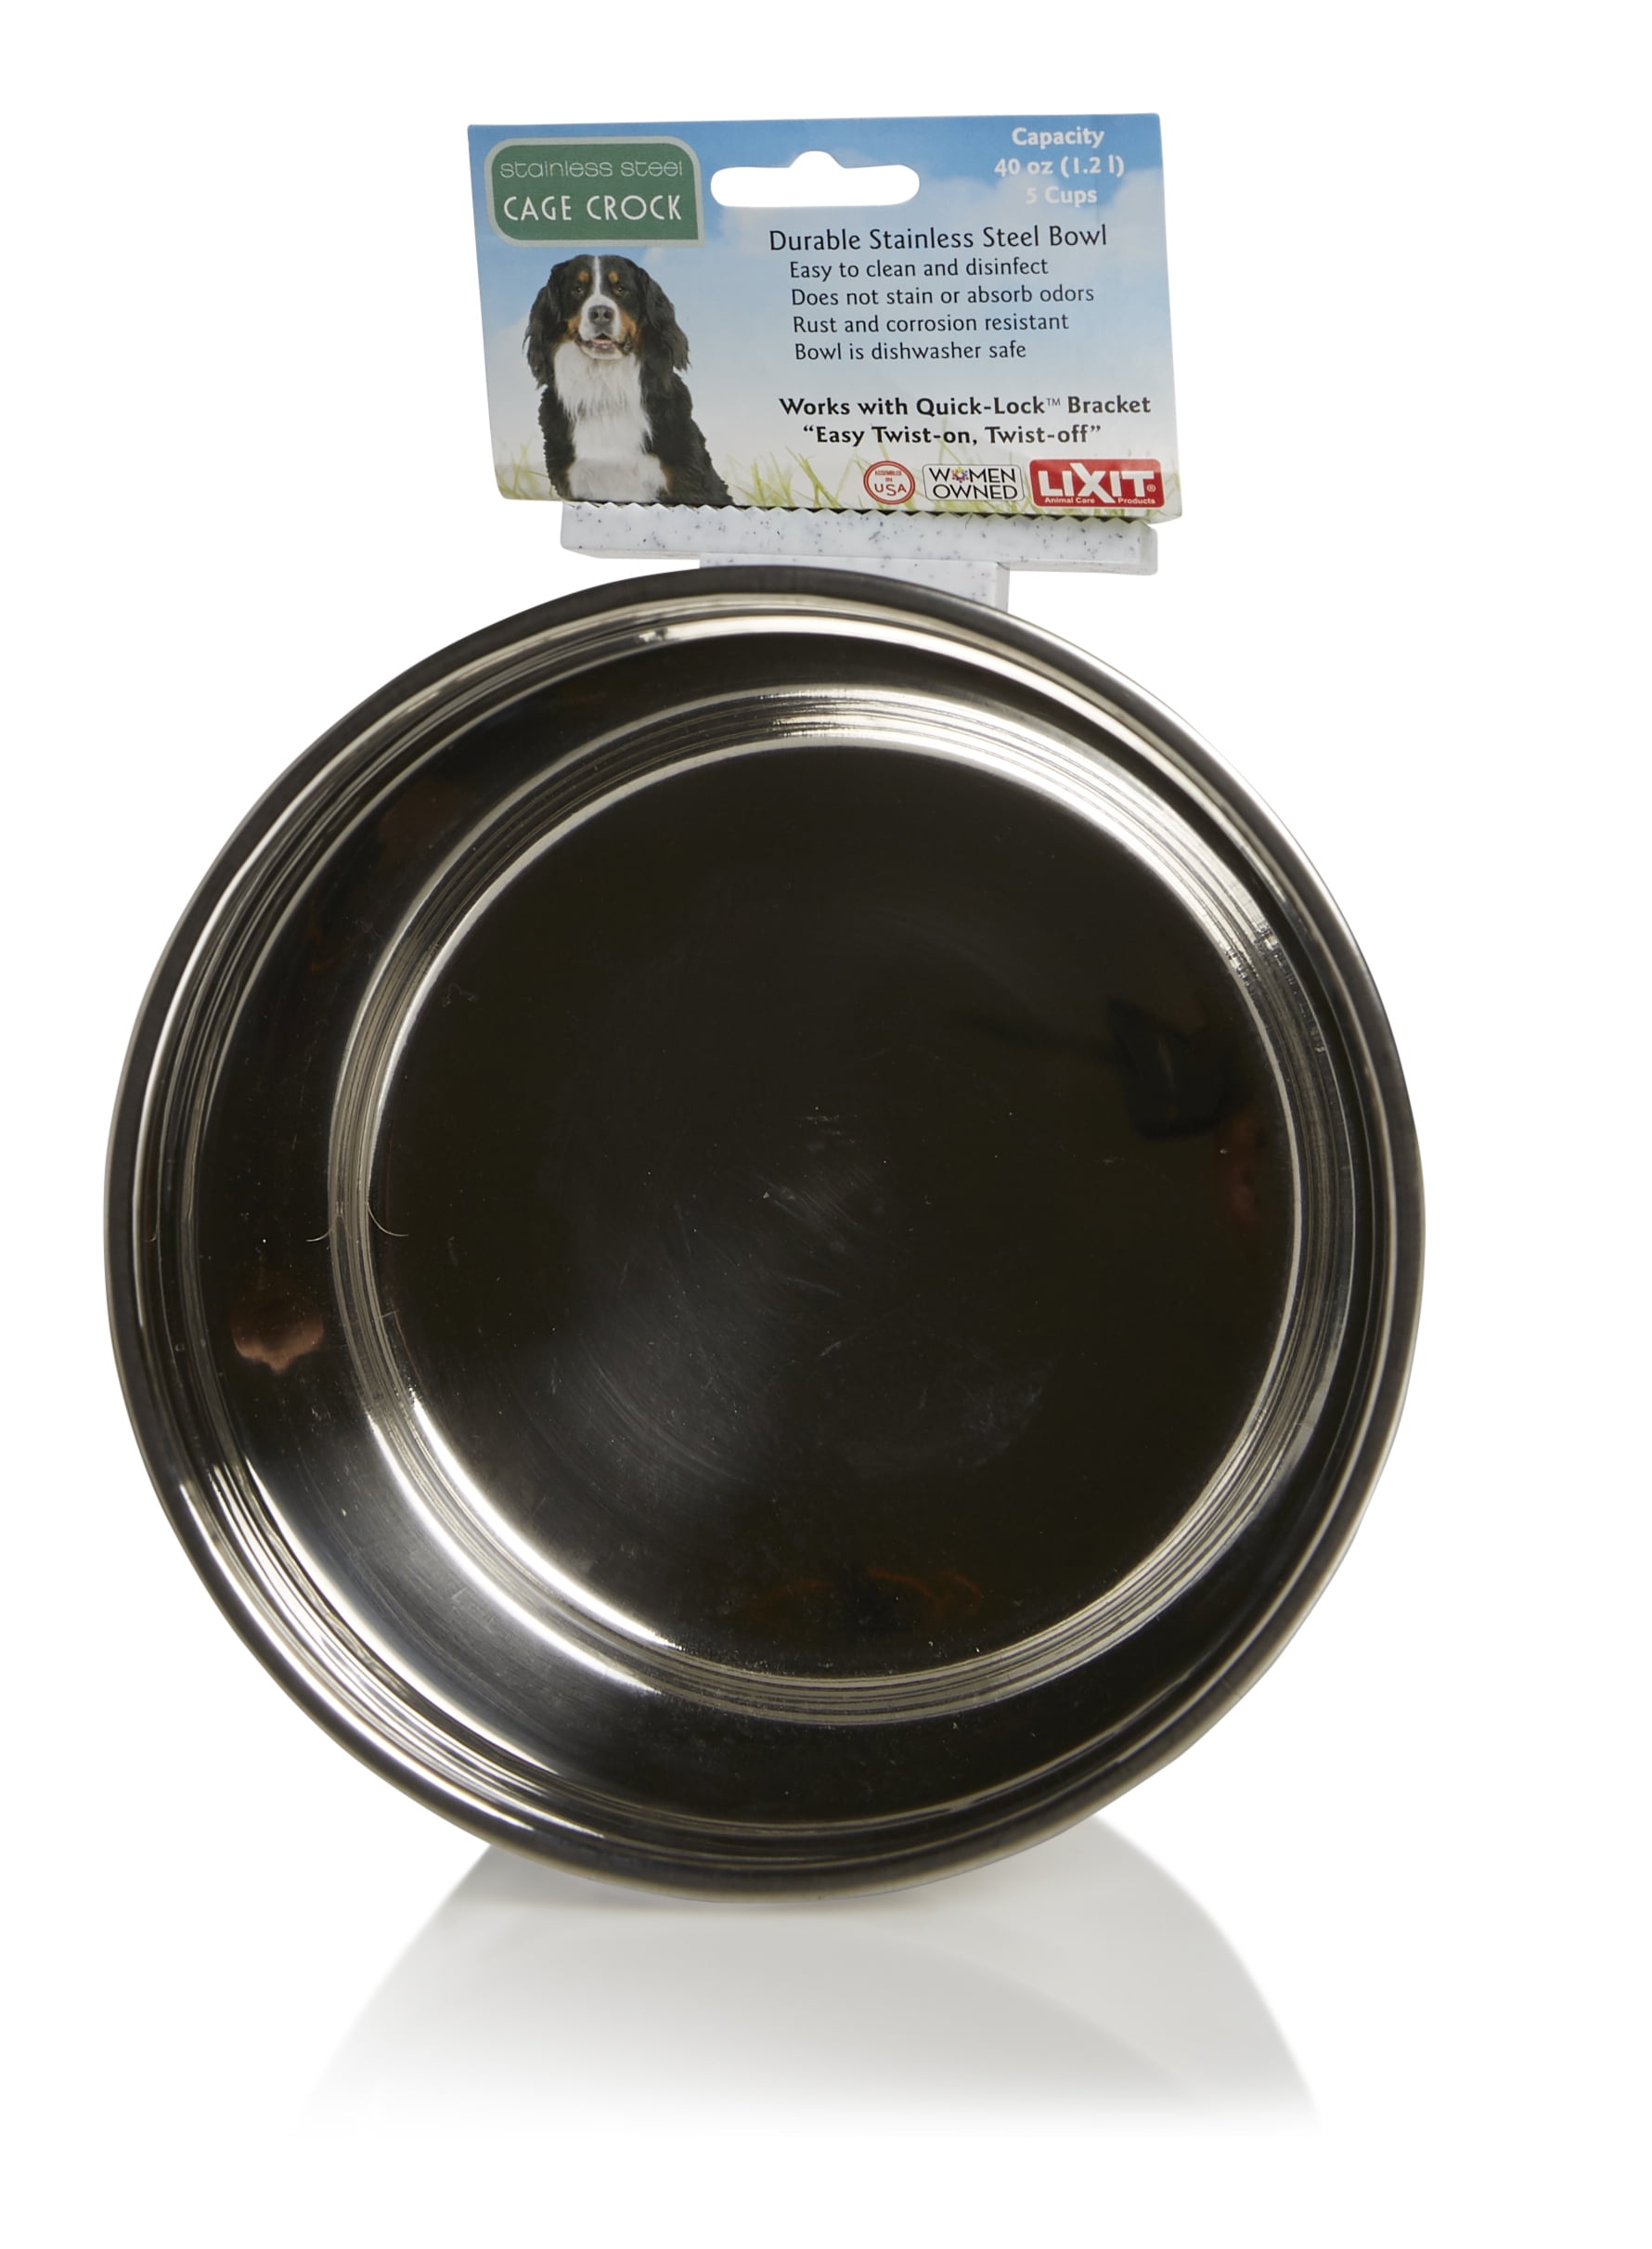 40 Oz Stainless Steel Cage Crock Dog Bowl With Bracket